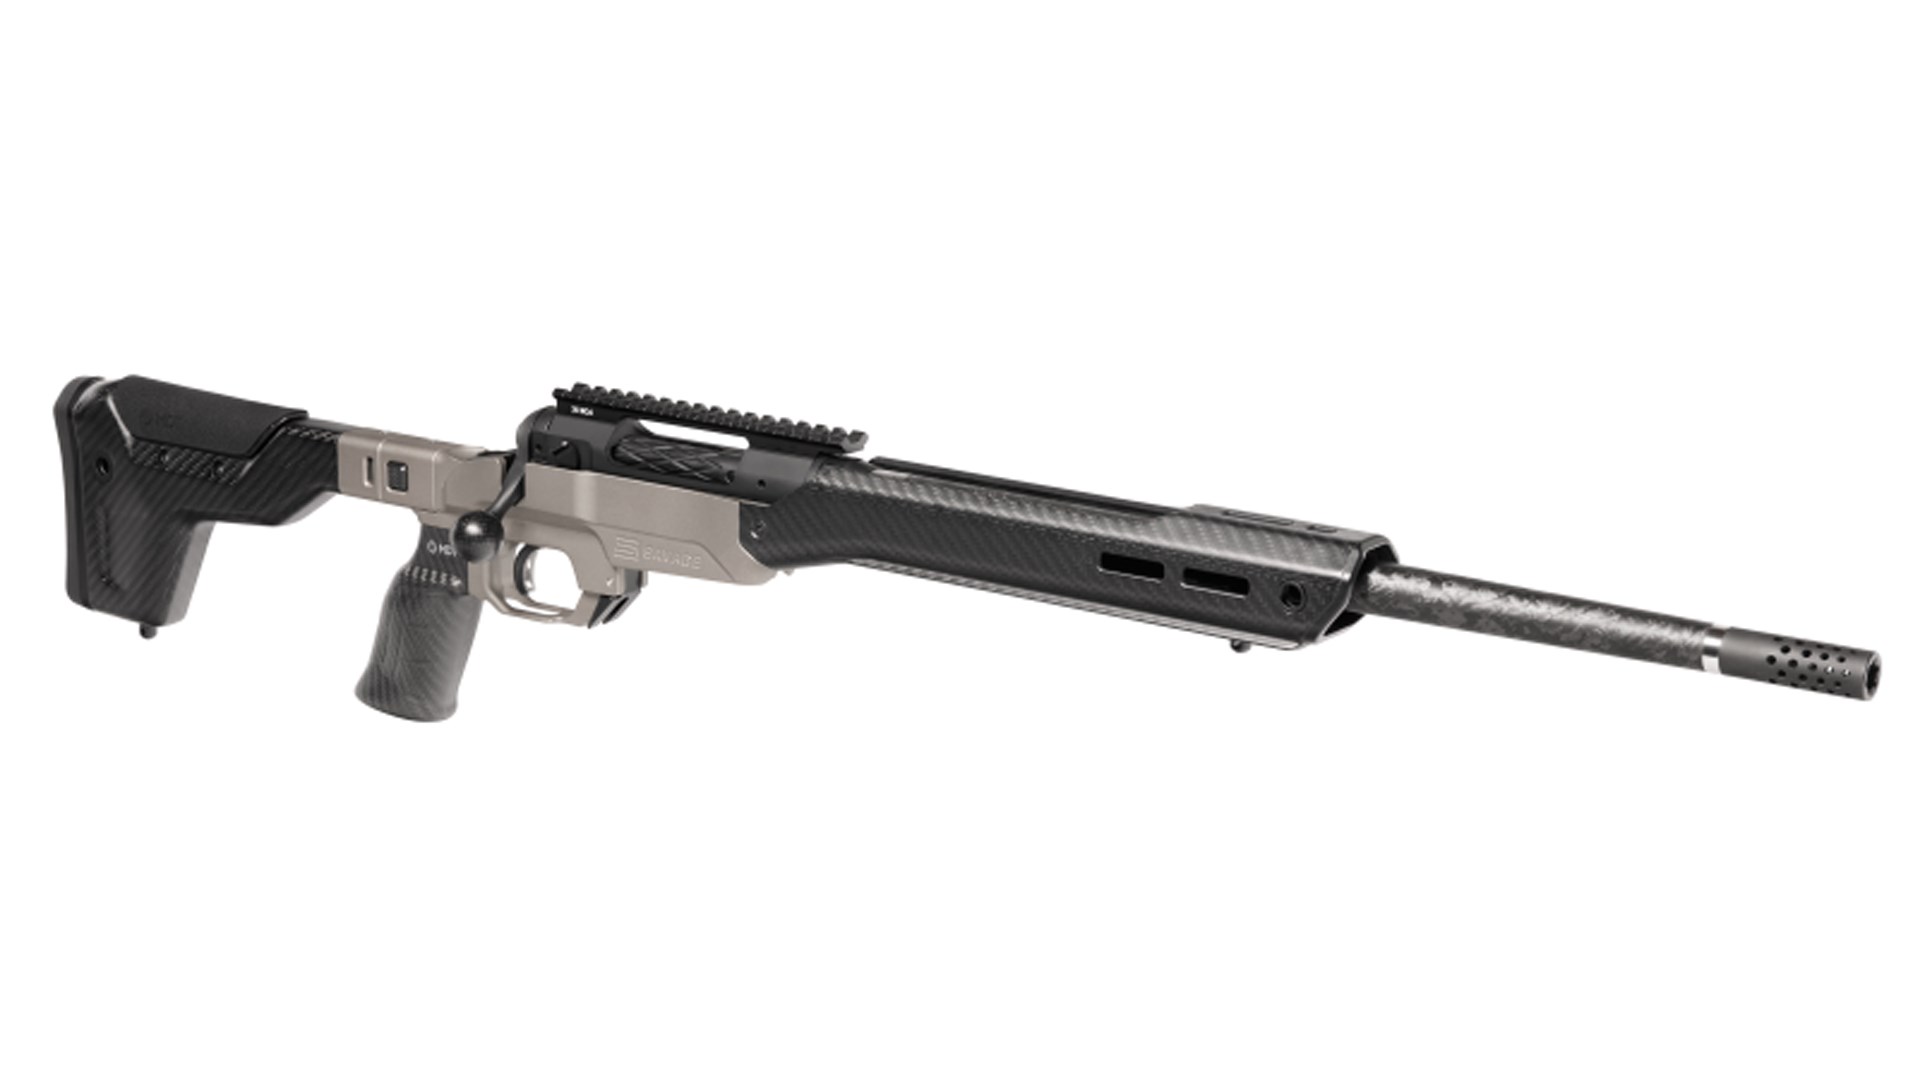 Right side of the Savage 110 Ultralite Elite chassis rifle.